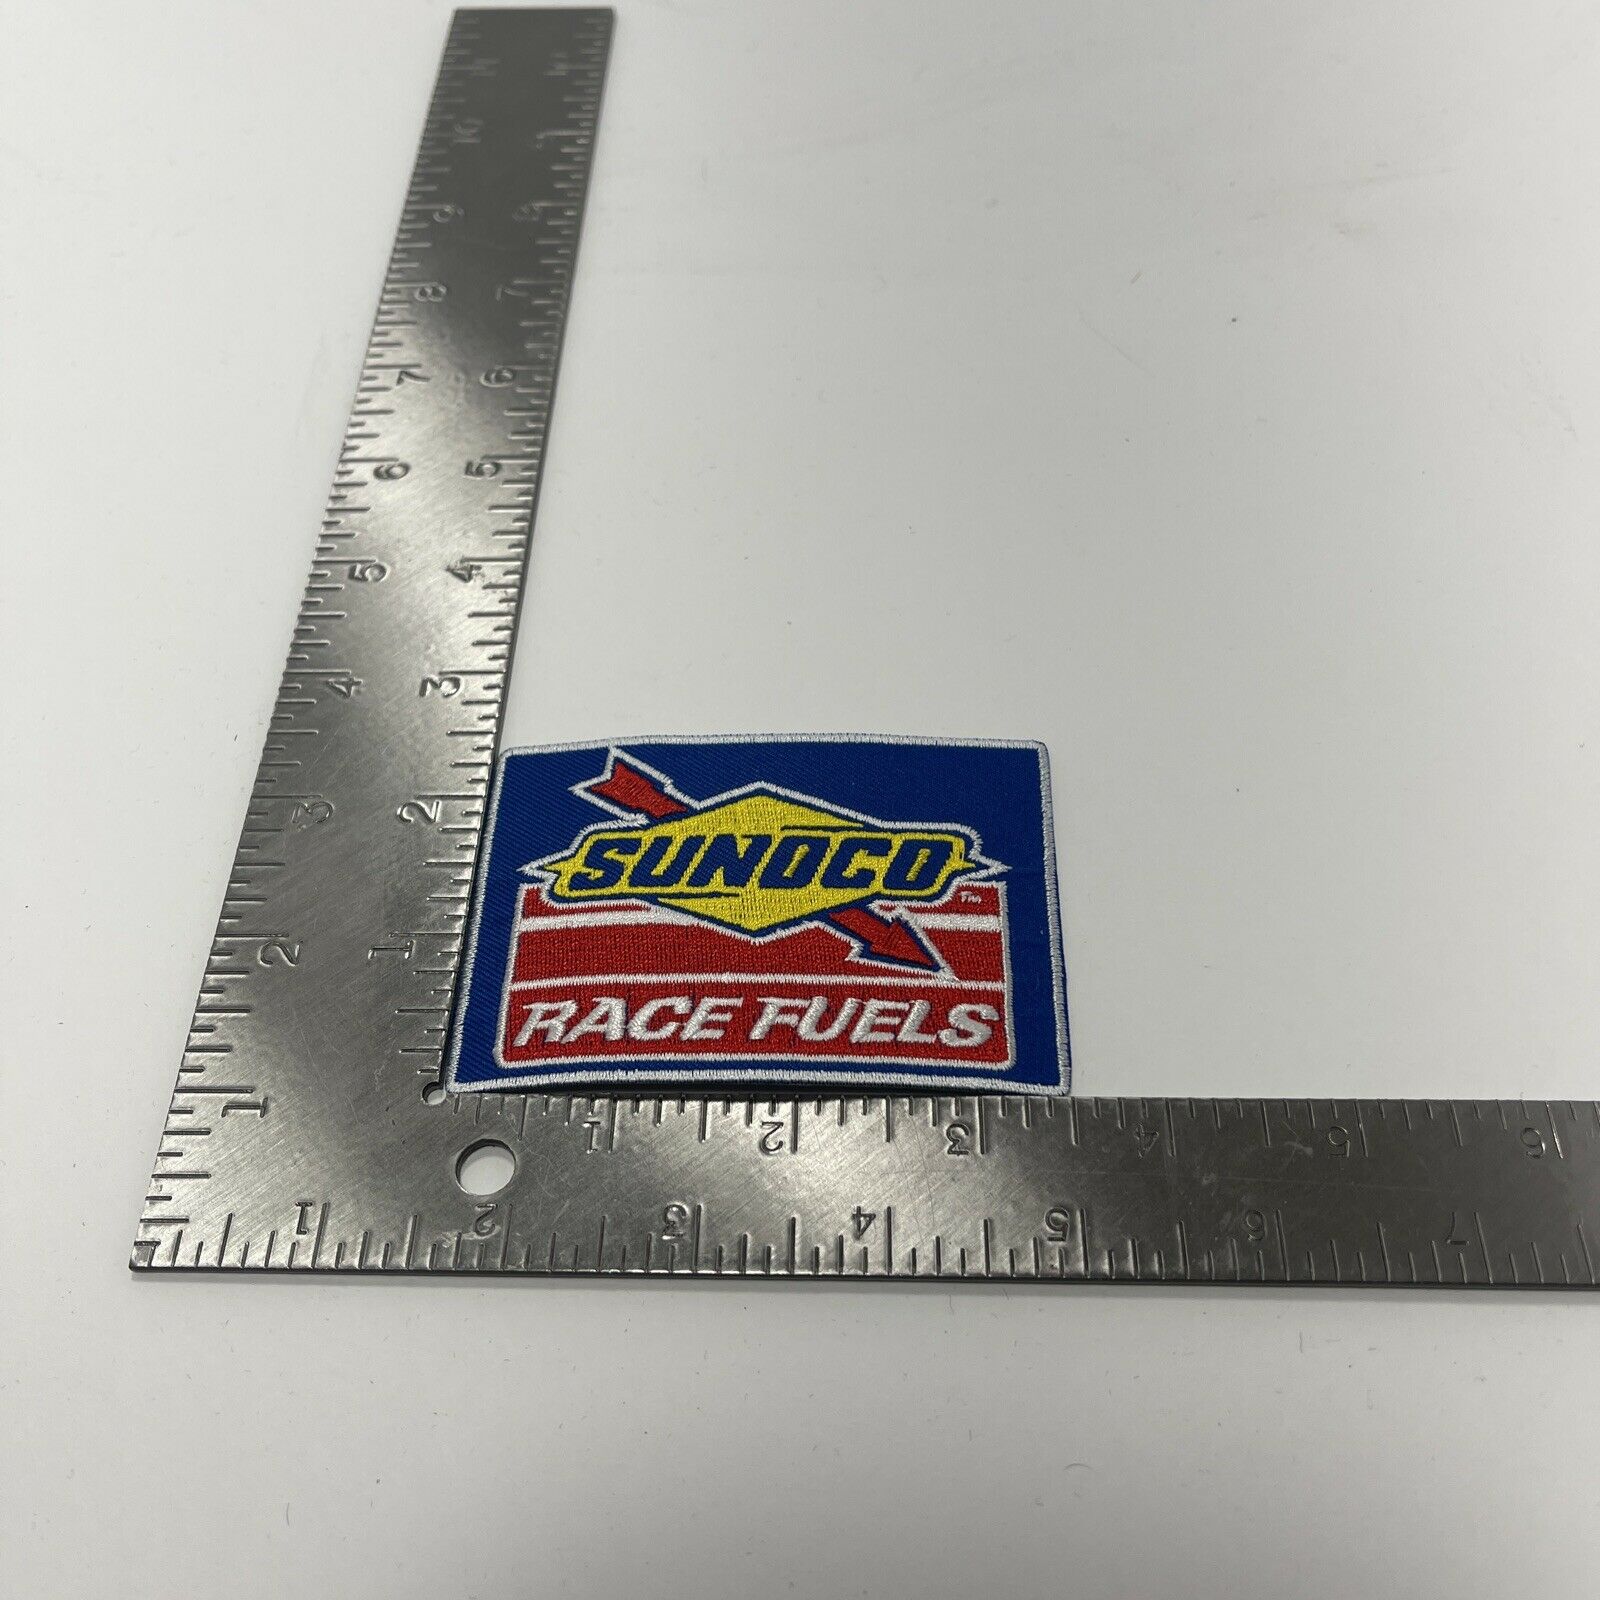 New 2 1/2 X 3 1/2 Inch Sunoco Race Fuels Iron On Patch